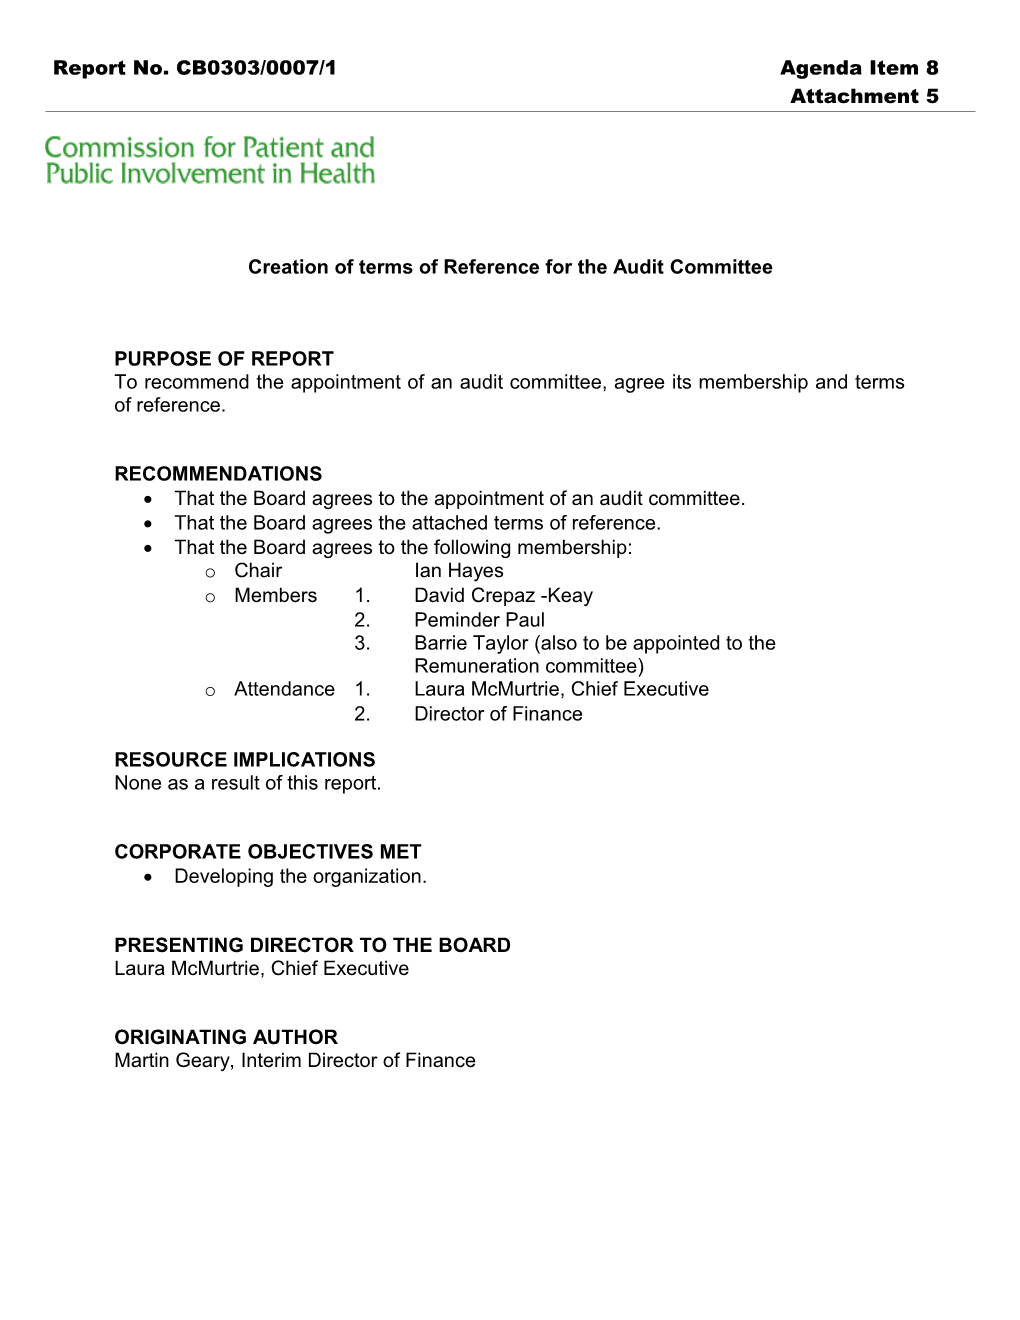 Creation of Terms of Reference for the Audit Committee